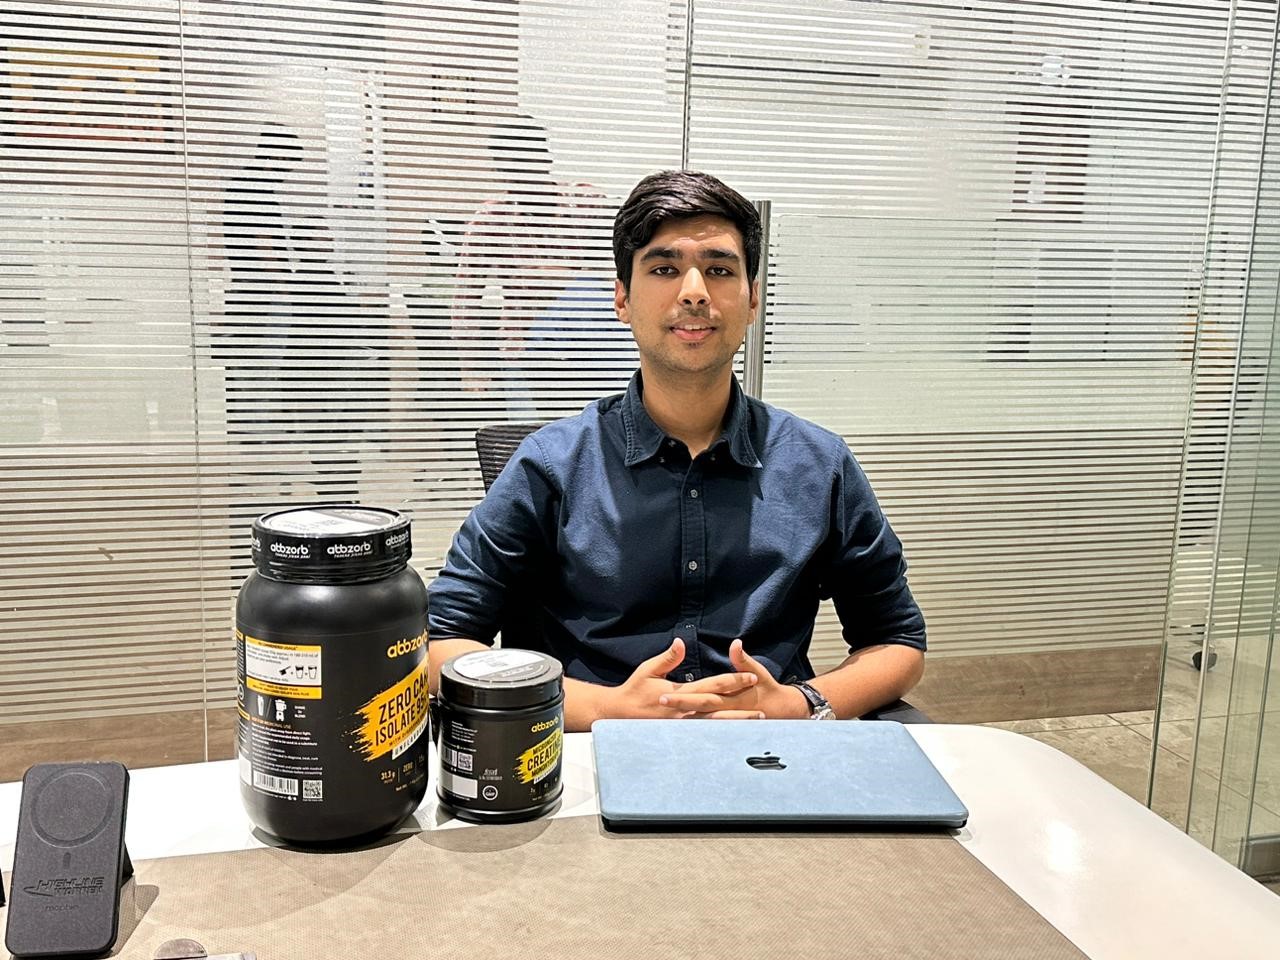 Young Entrepreneur “Abbzorb” CEO Adit Agrawal aims to launch multiple ventures